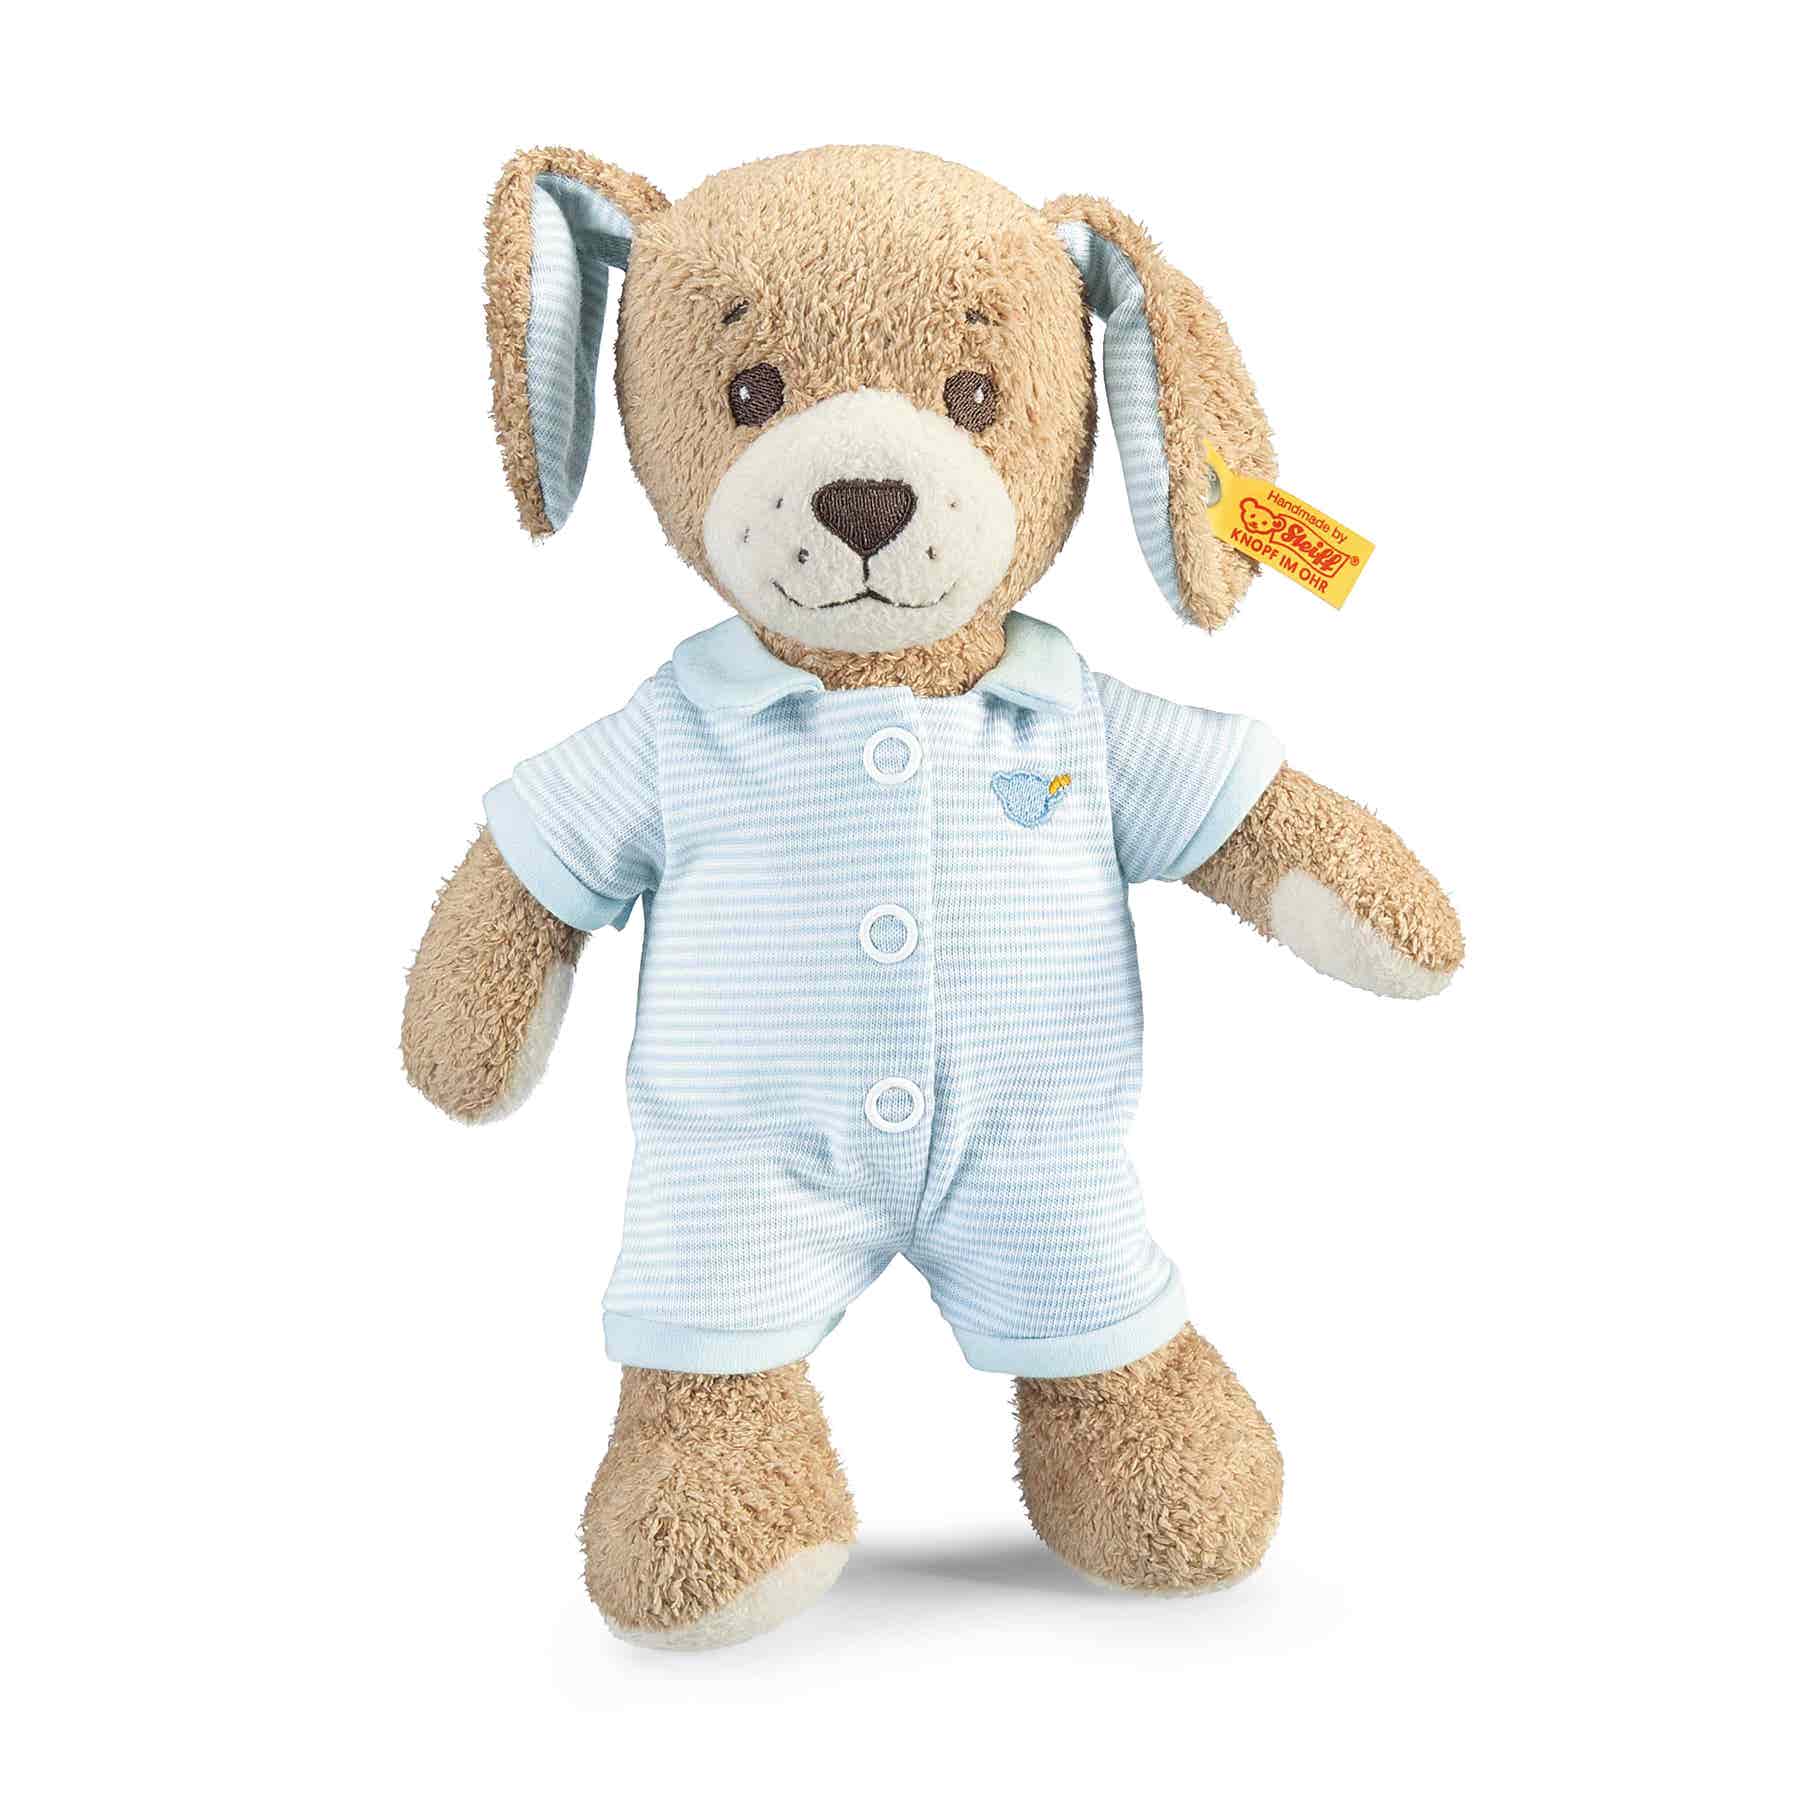 Steiff soft toy dog with a removal blue outfit